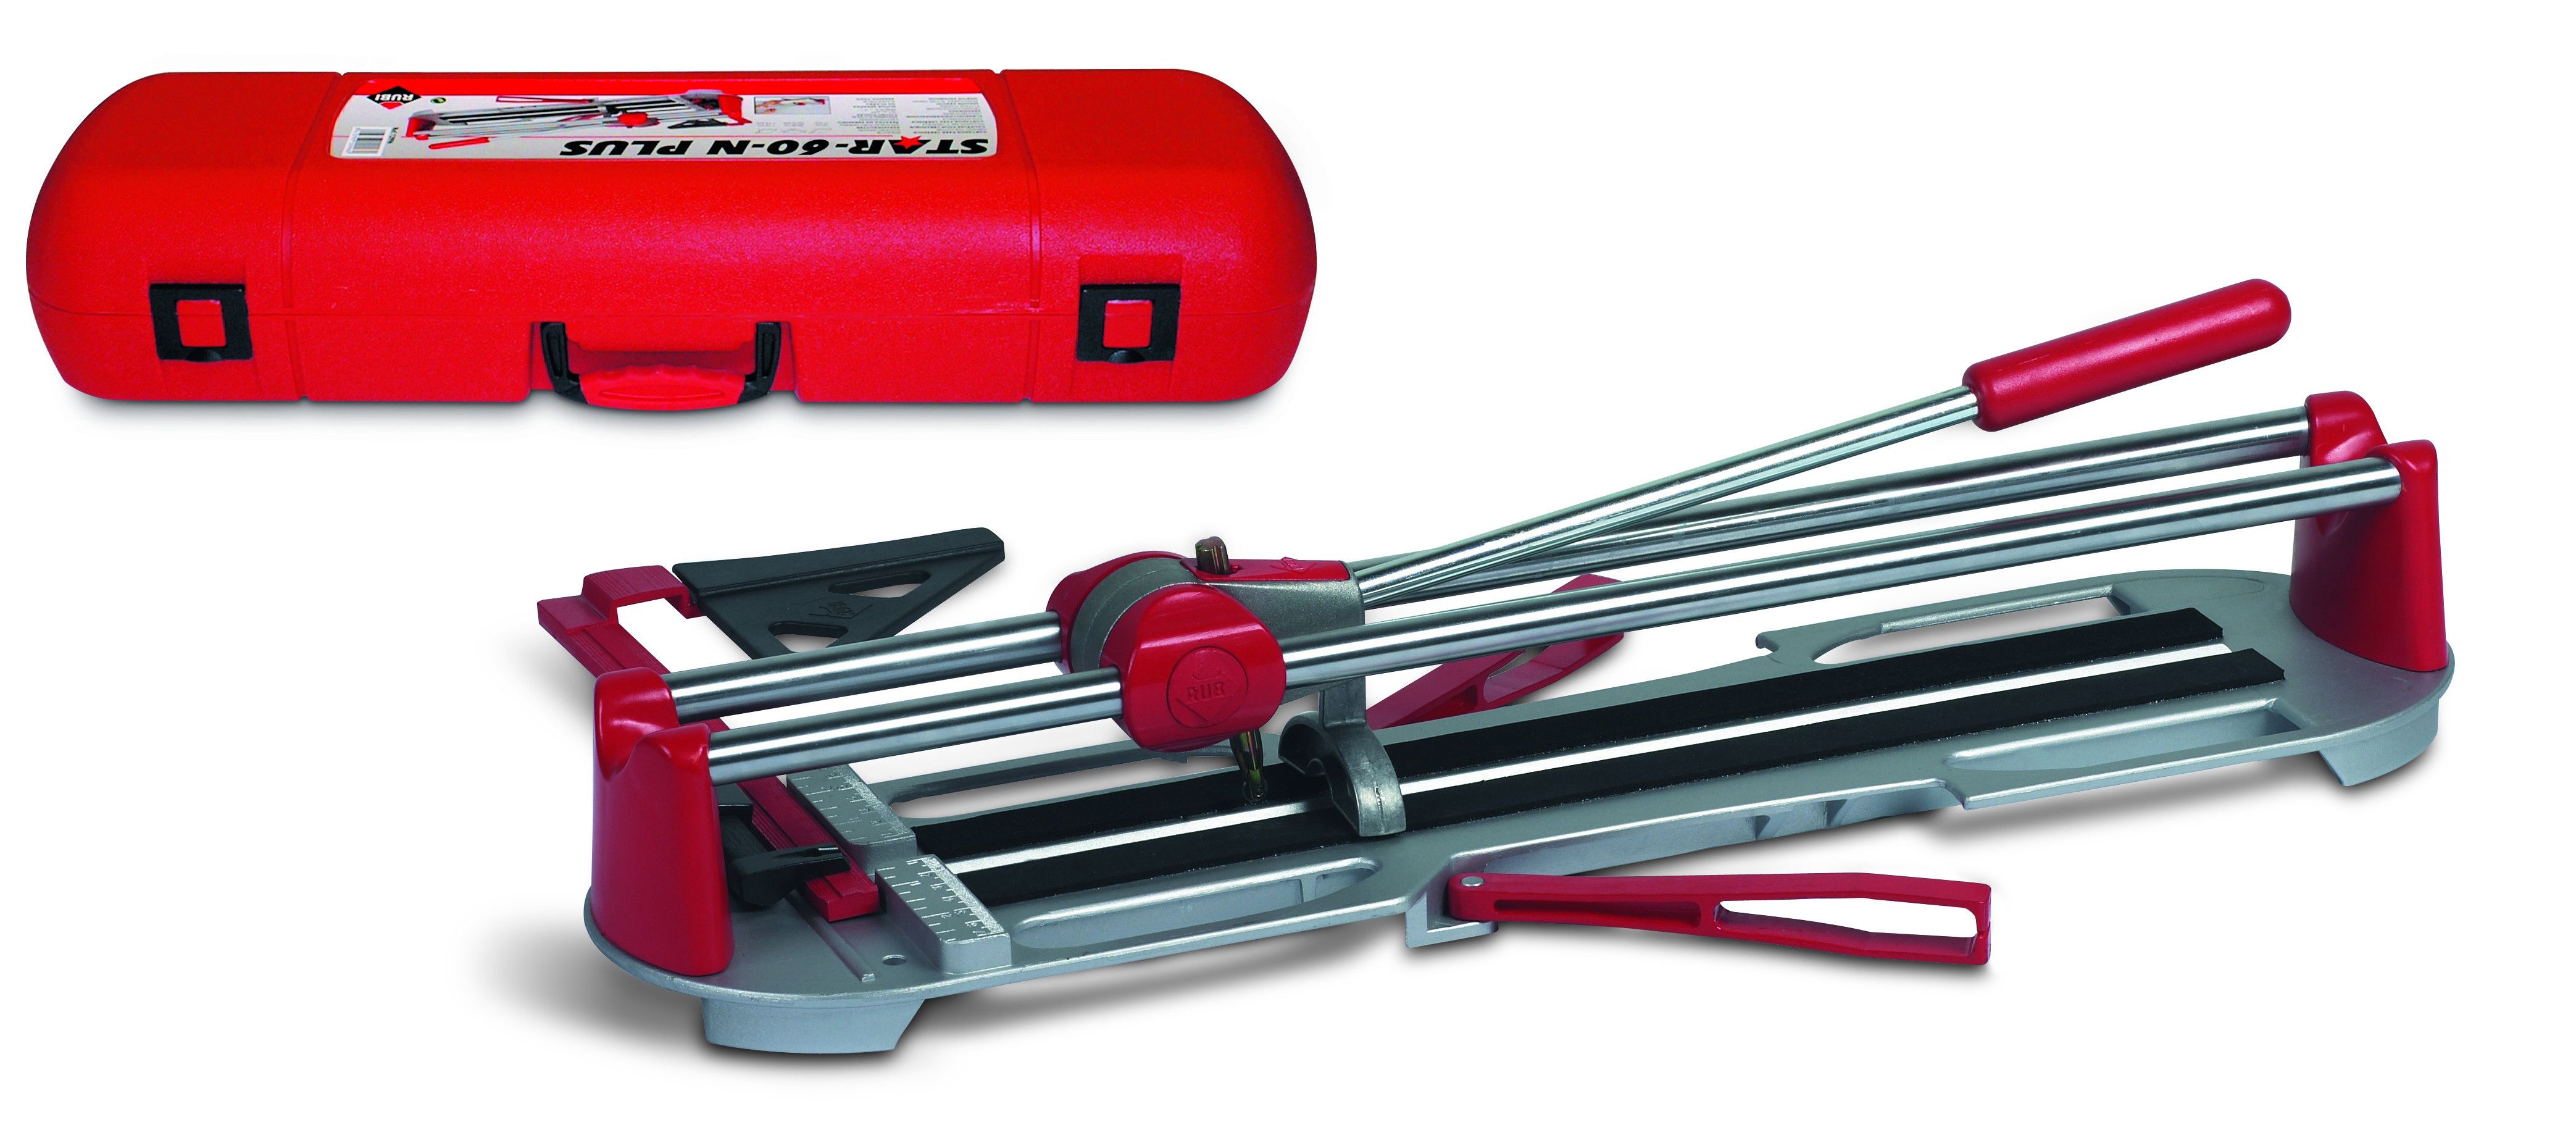 Rubi Manual Tile Cutter | Departments | TradePoint